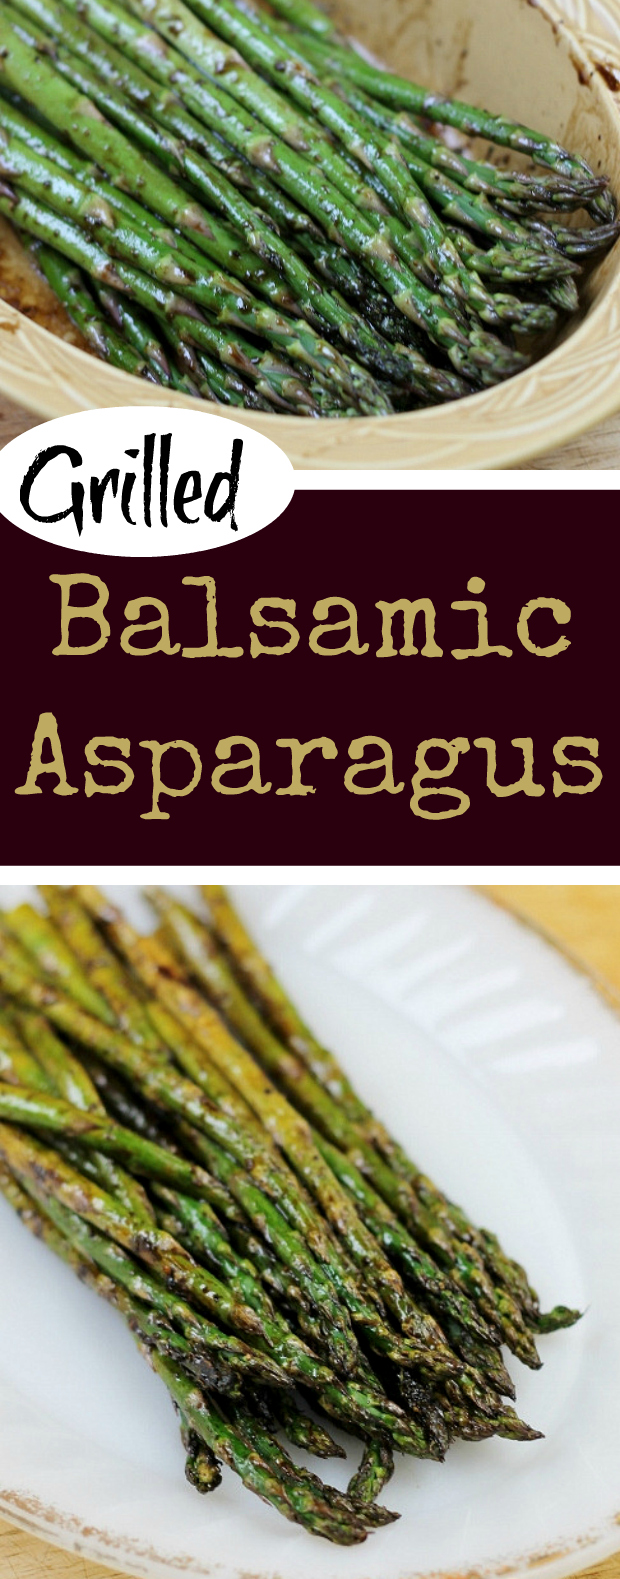 Grilled Balsamic Asparagus Recipe - Tasty Easy Way to Cook Asparagus